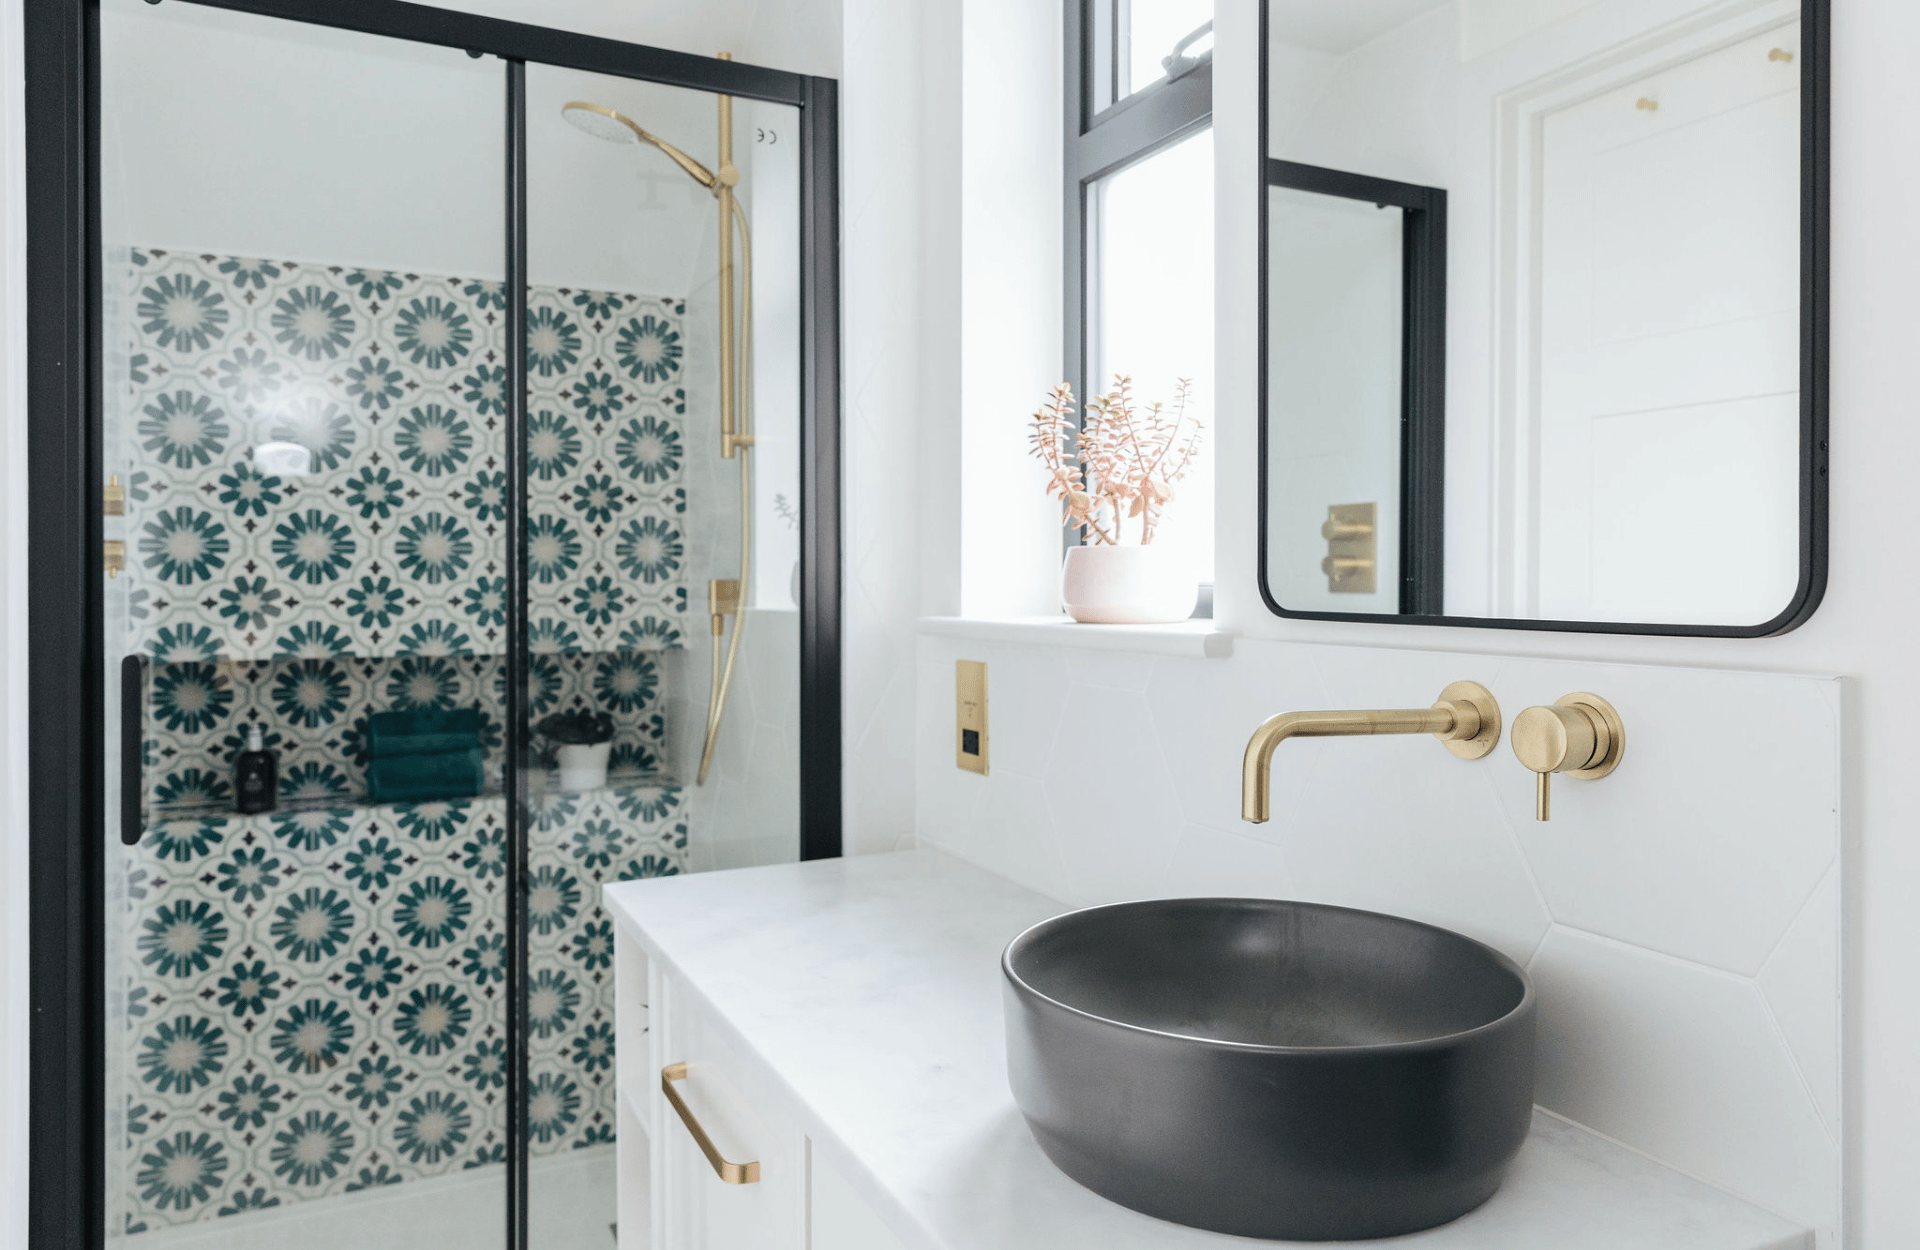 Monochrome bathroom with green and gold details